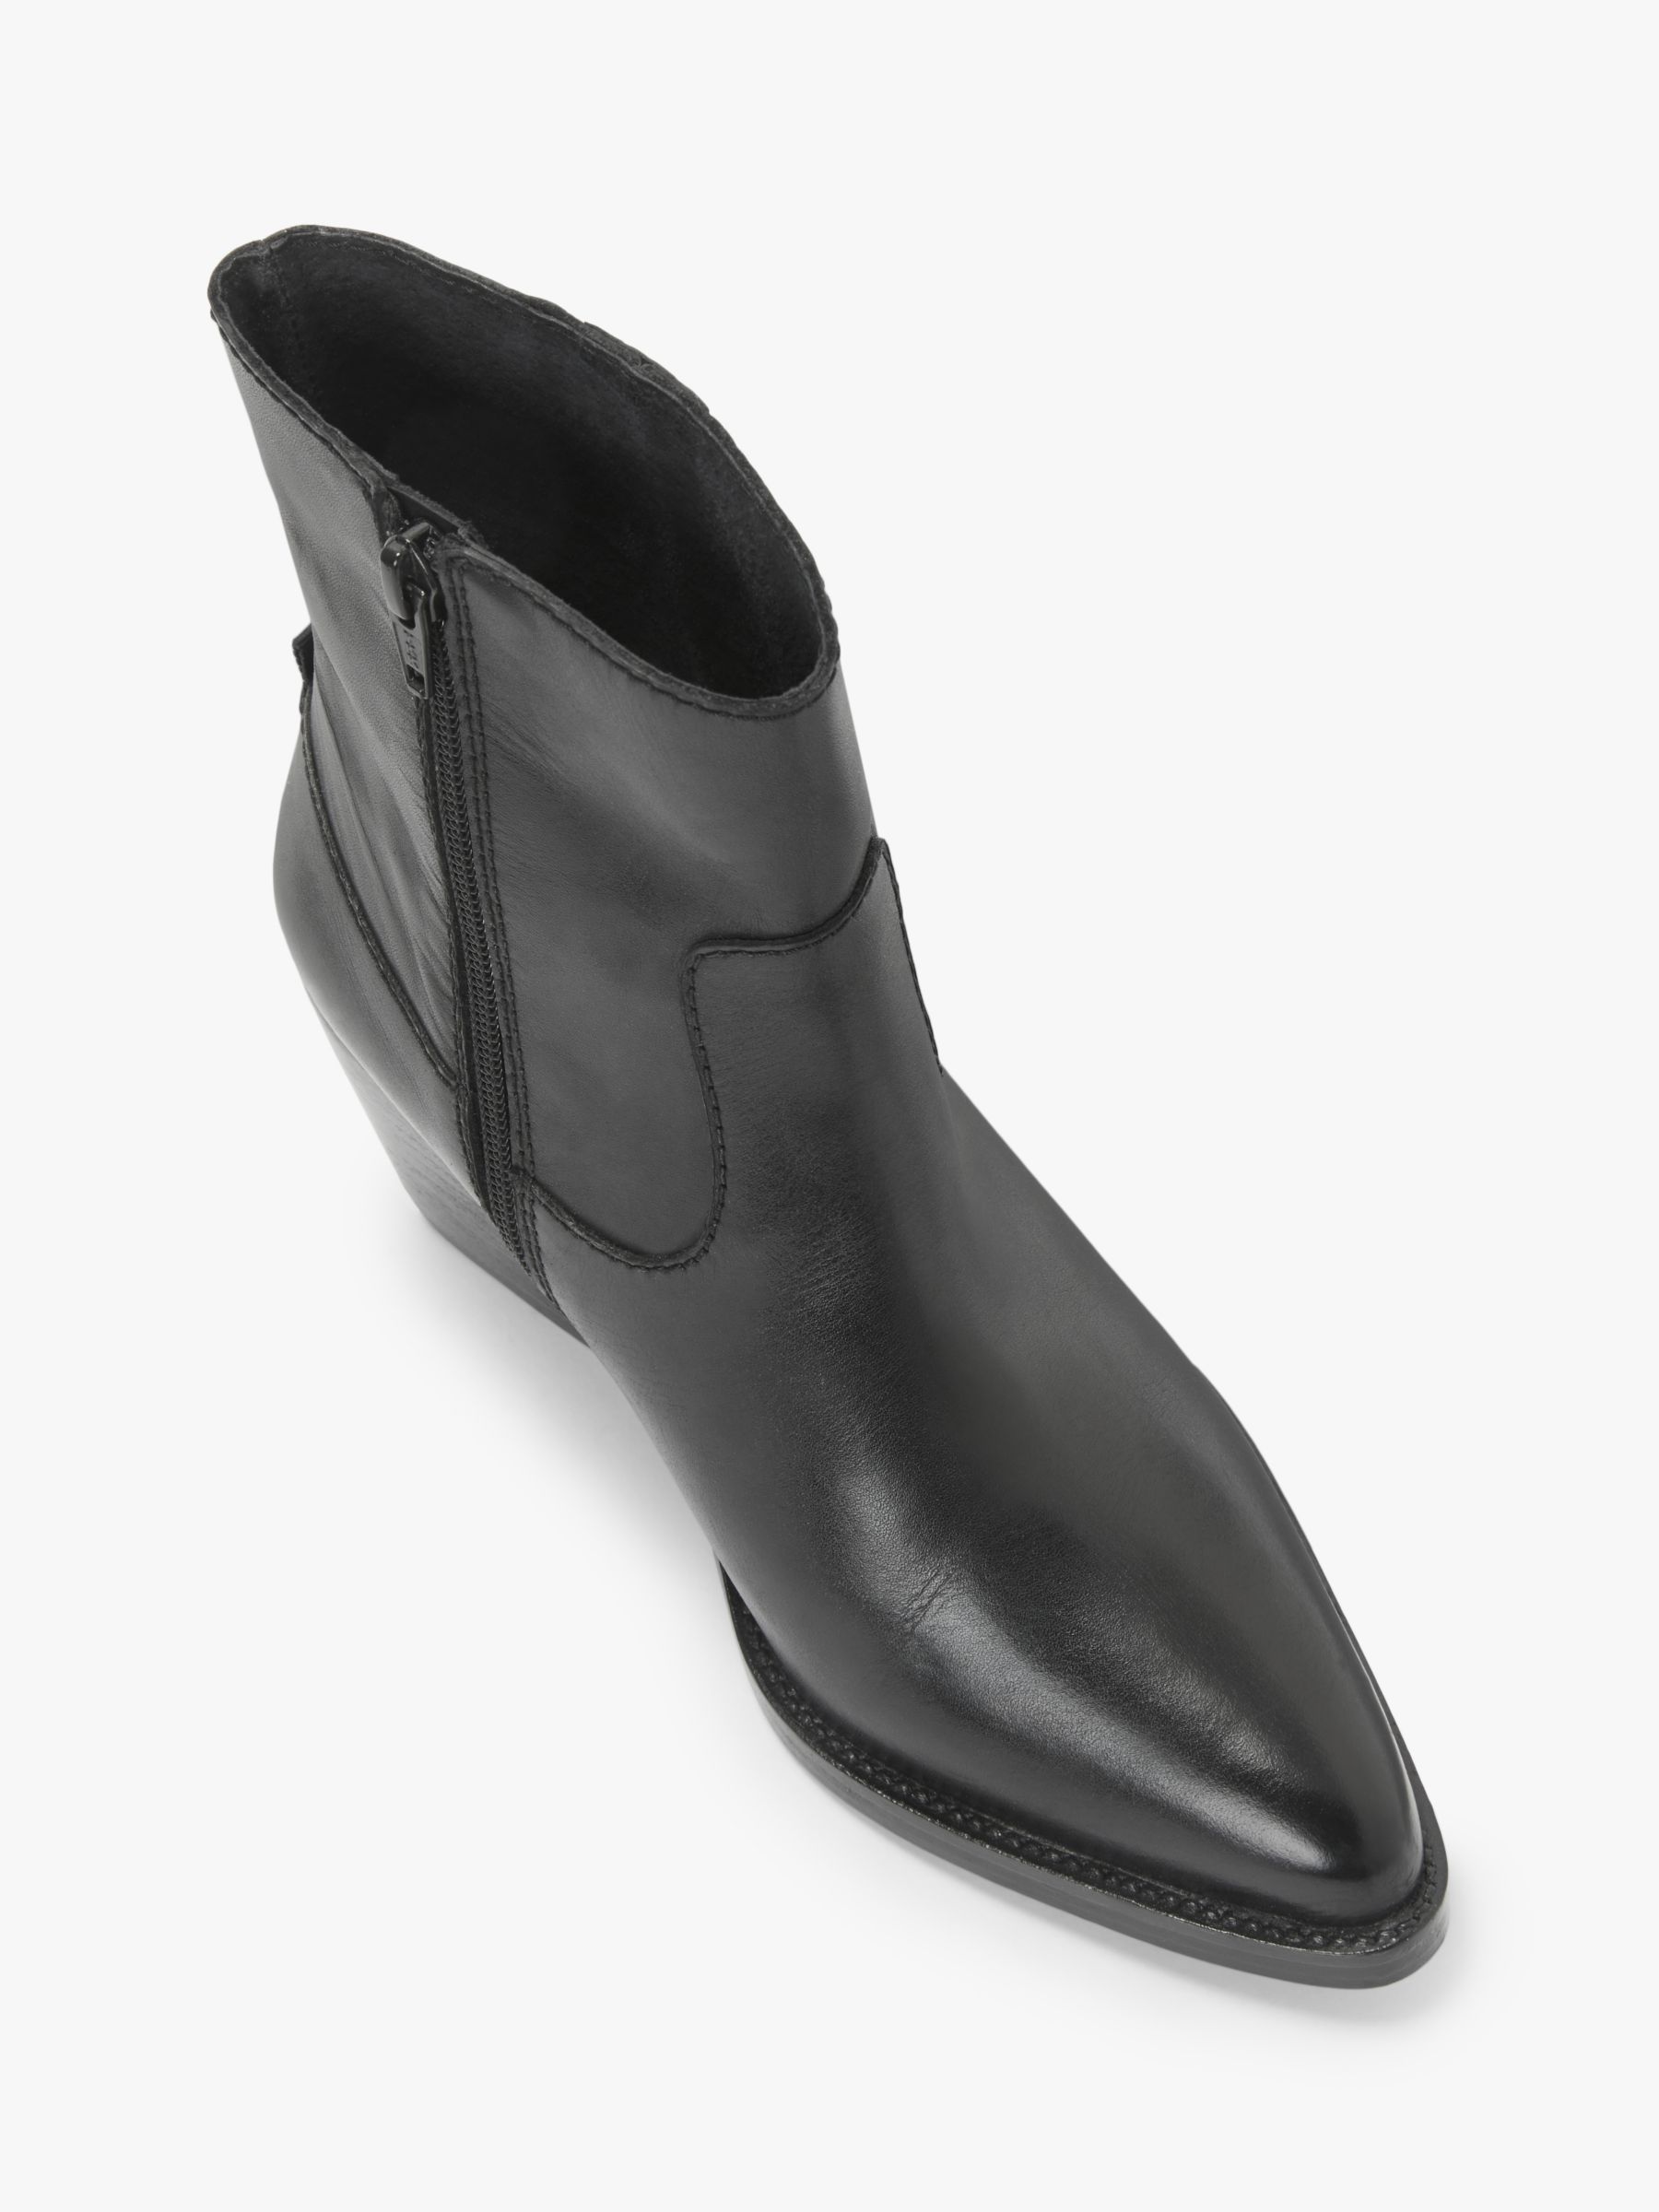 john lewis ankle boots